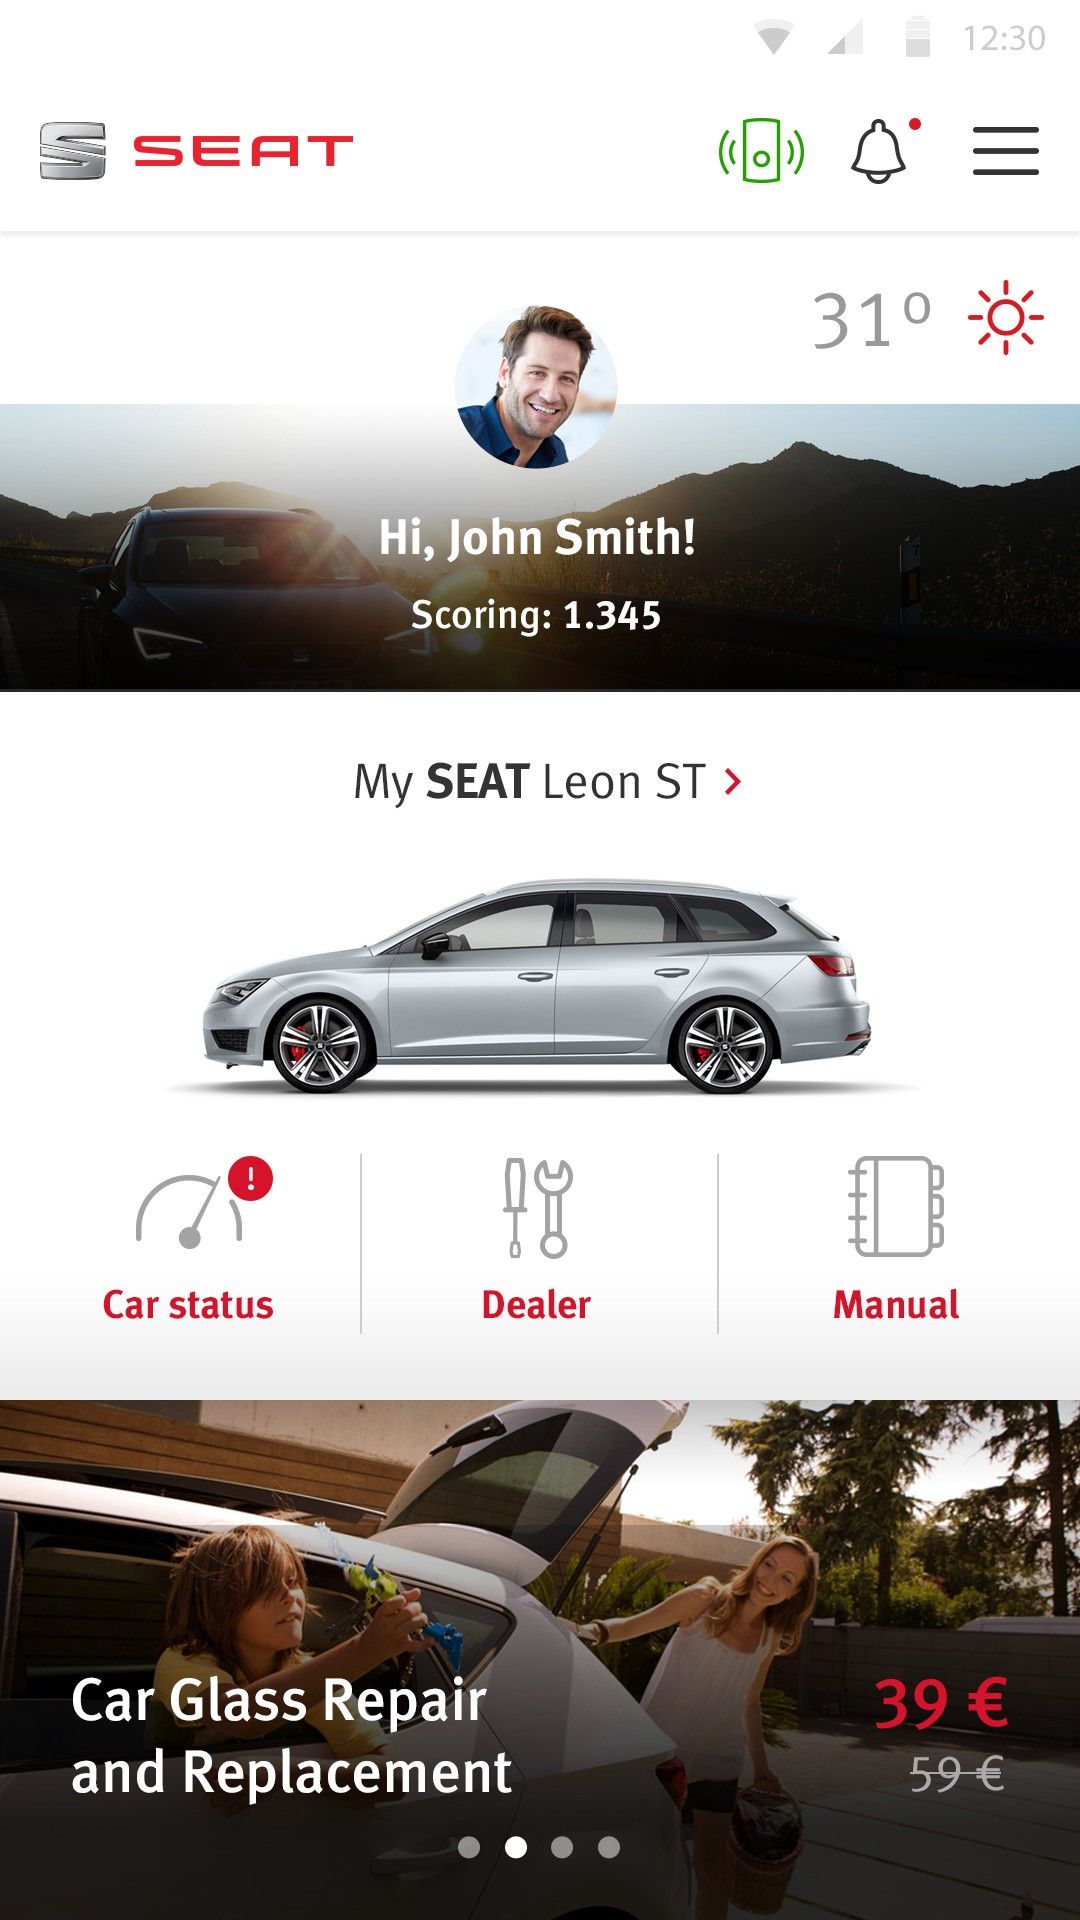 Accenture and SEAT Build Proof of Concept to Support Drivers’ Connected Lifestyles